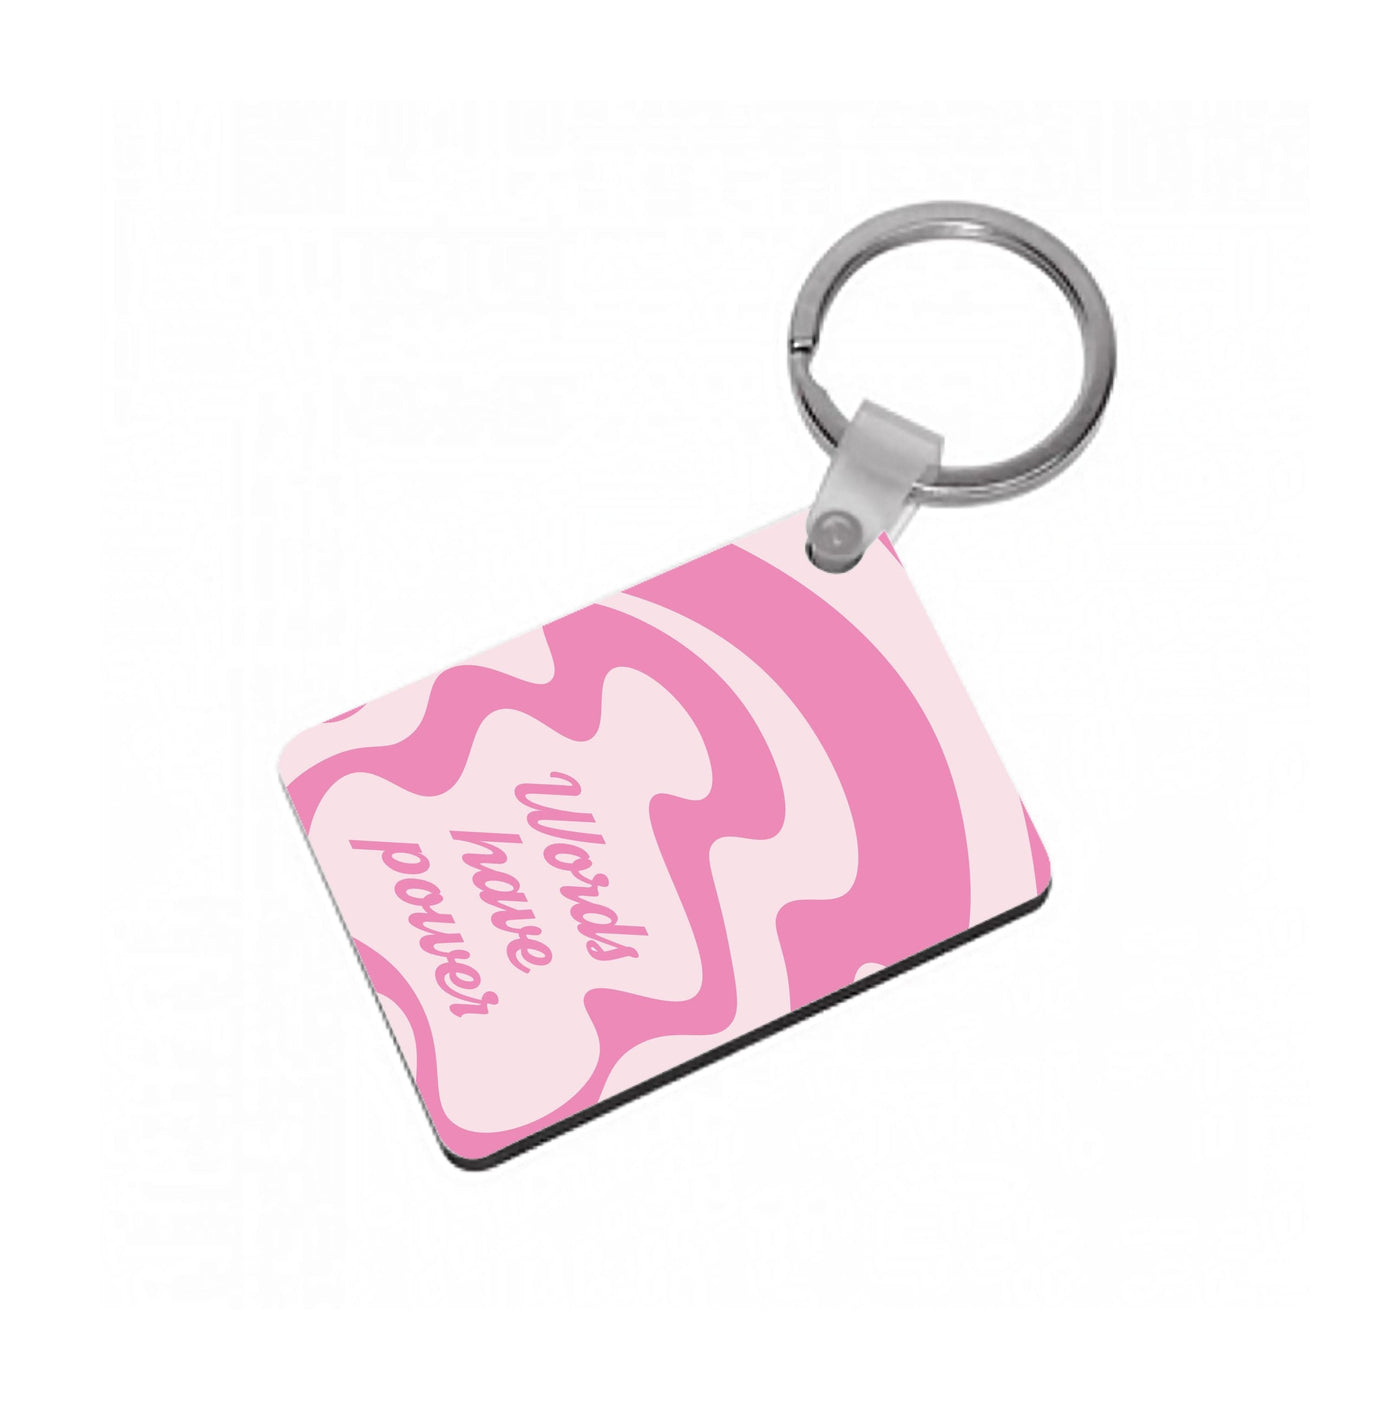 Words Have Power - The Things We Never Got Over Keyring